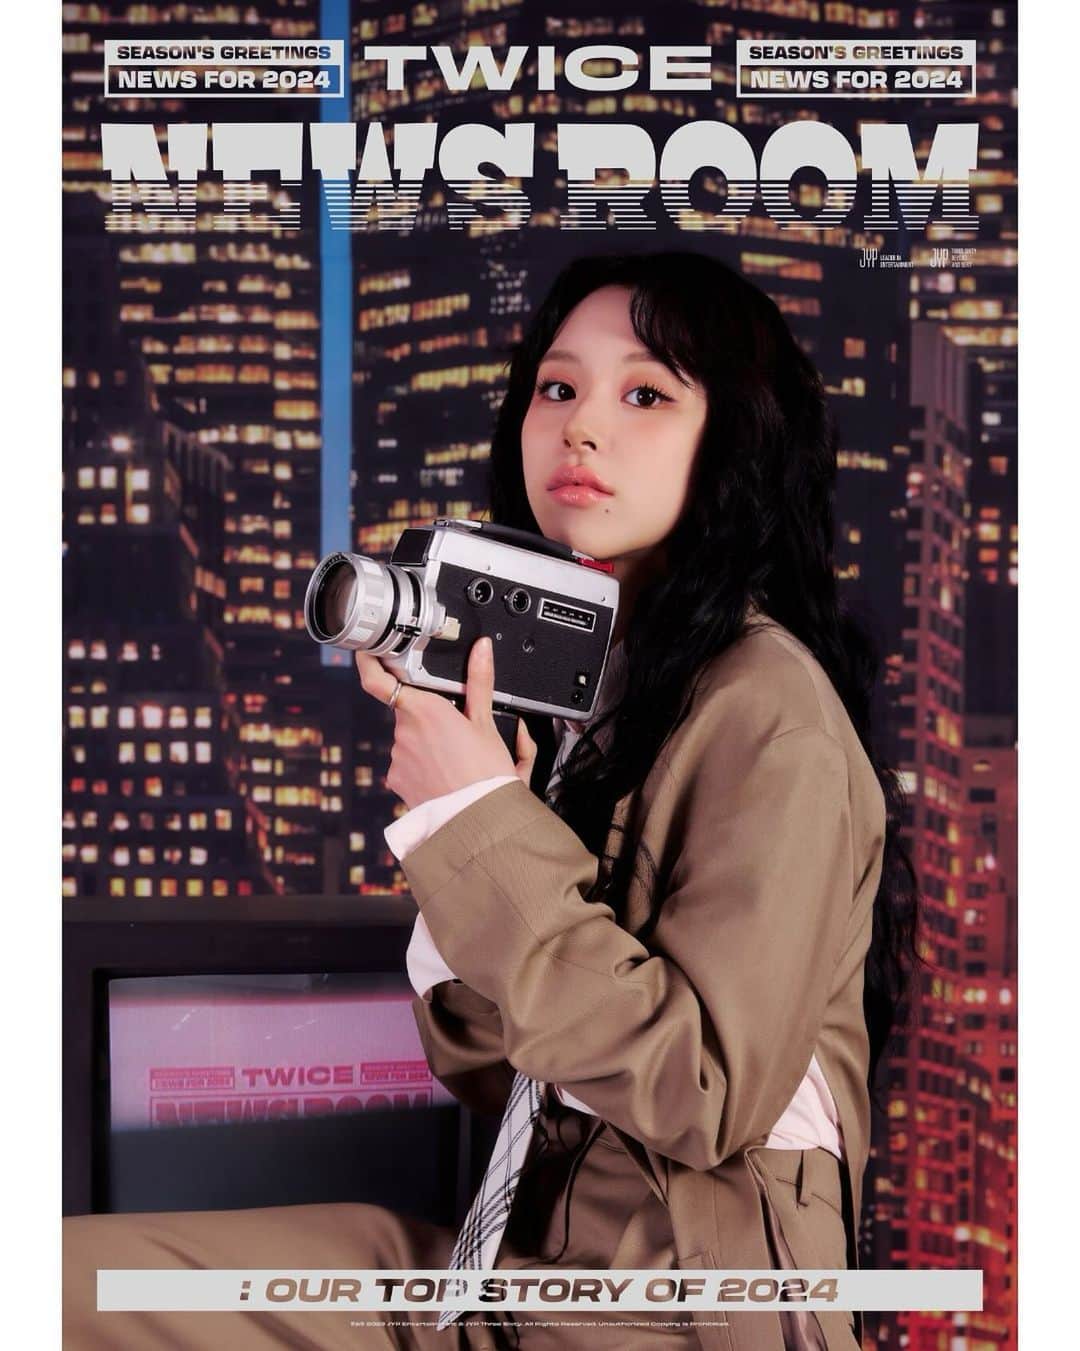 TWICEのインスタグラム：「TWICE SEASON’S GREETINGS 2024 TWICE NEWS ROOM : Our Top Story of 2024🎥  #CHAEYOUNG #채영  PRE-ORDER│2023.11.07 TUE - 2023.11.15 WED (KST)  #TWICE #트와이스 #TWICE_NEWS_ROOM #2024SEASONSGREETINGS」